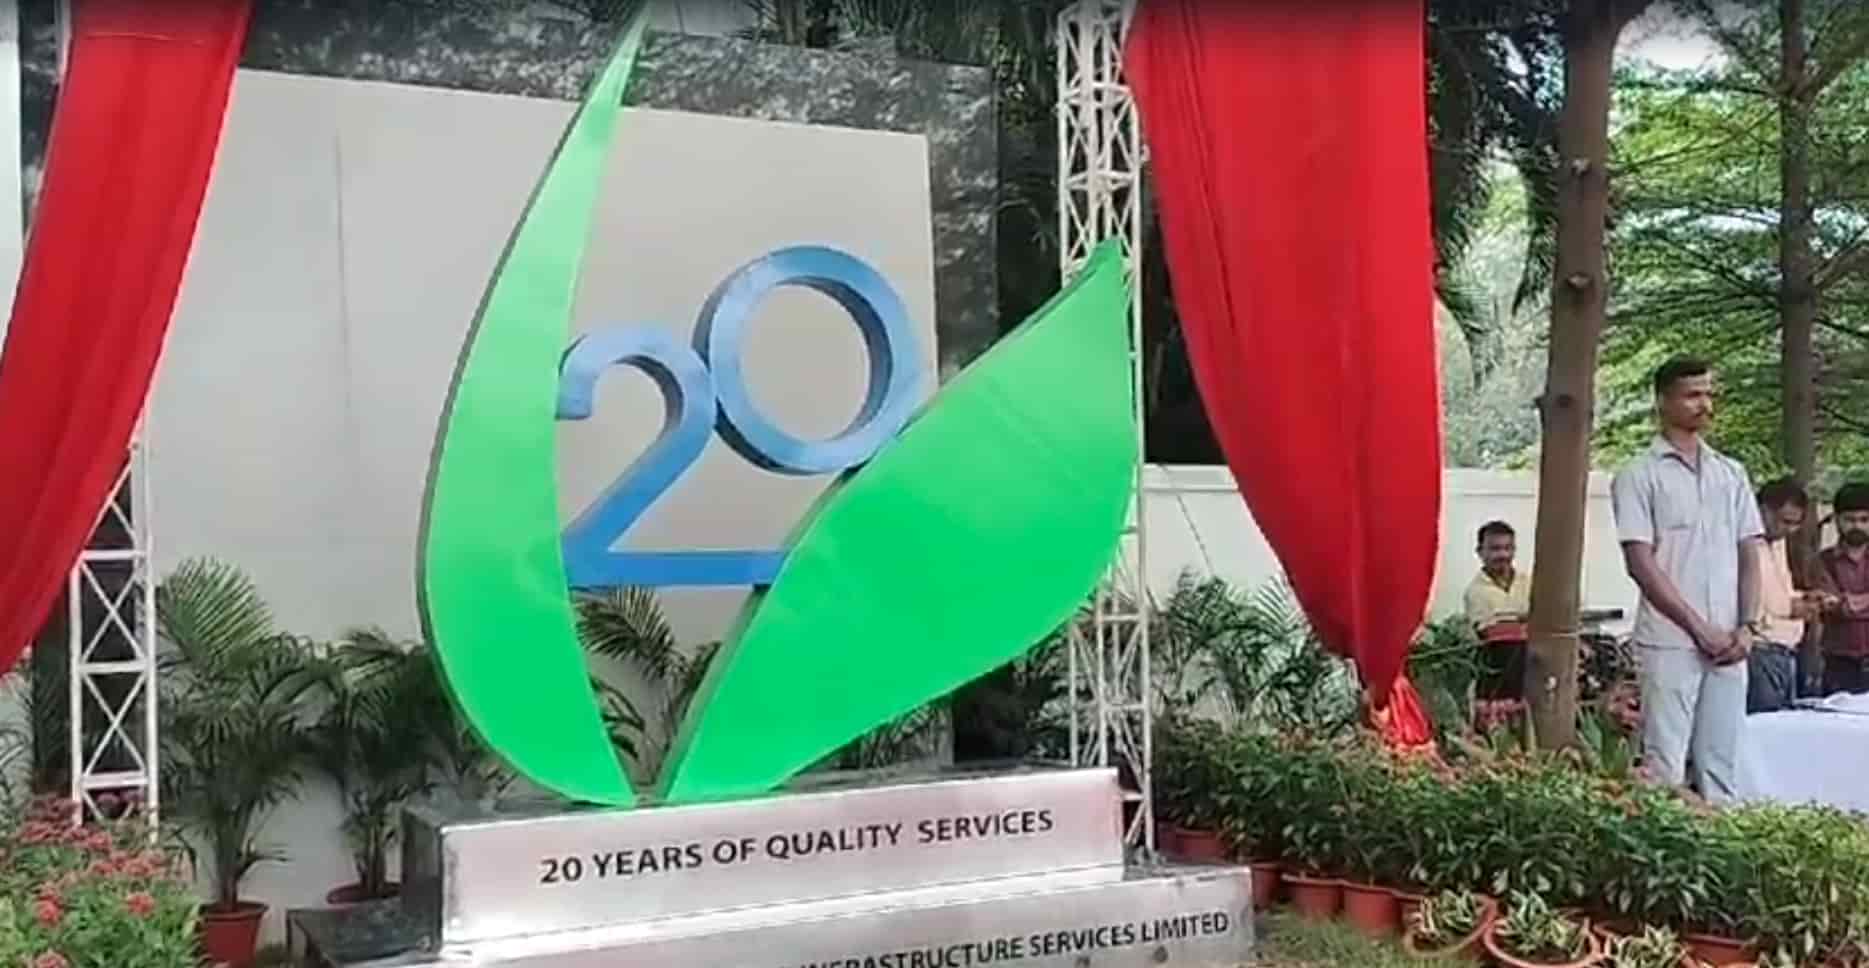 Tata Steel's VP Chanakya Chaudhary Launches Logo Marking 20 Years of Quality Utility Service